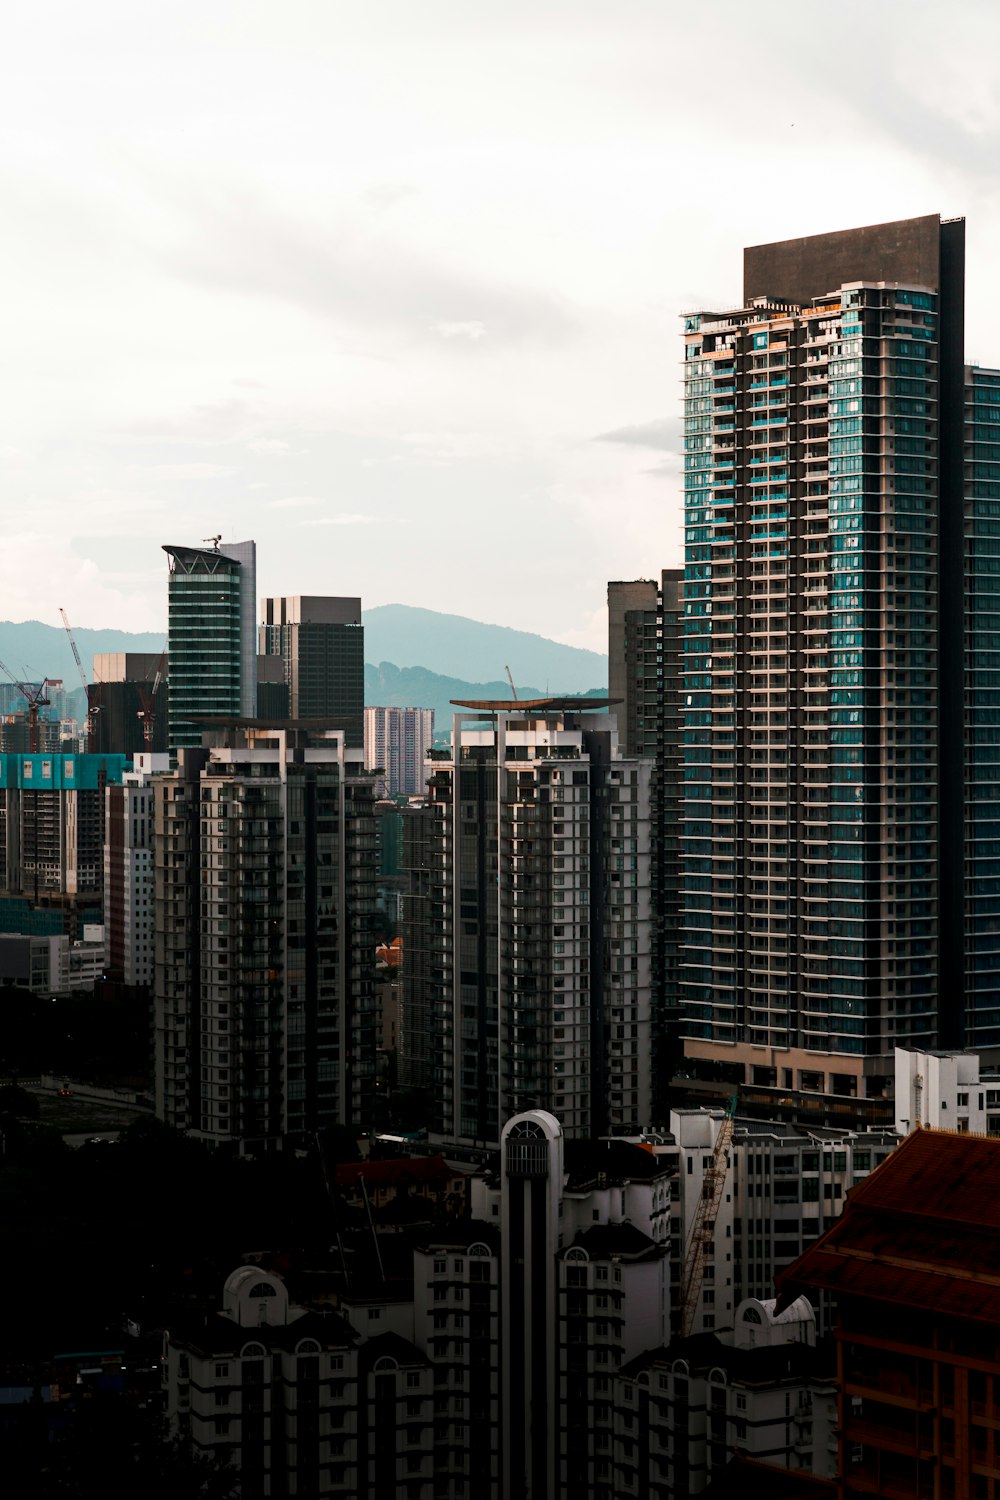 a city skyline with tall buildings and mountains in the background